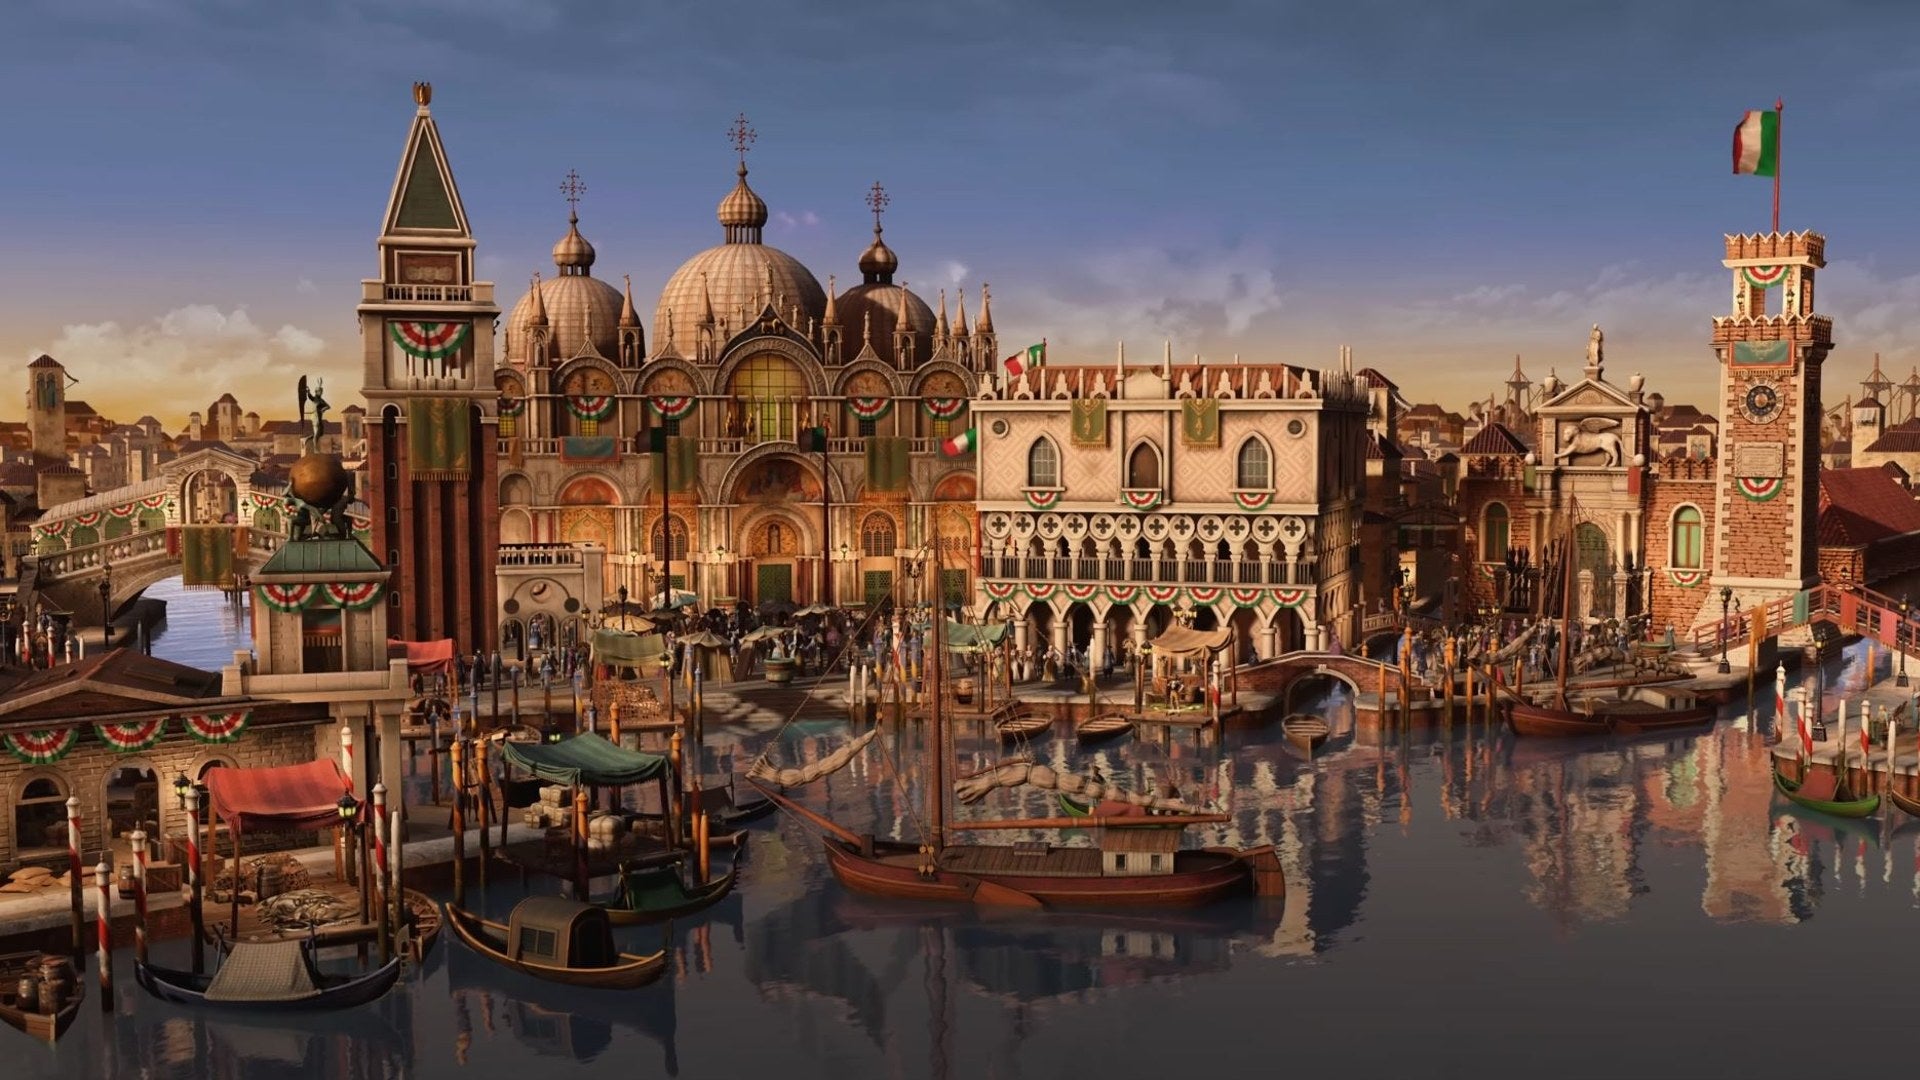 Age Of Empires 3: Definitive Edition's latest DLC pack The Knights Of The Mediterranean introduces Italian civilization